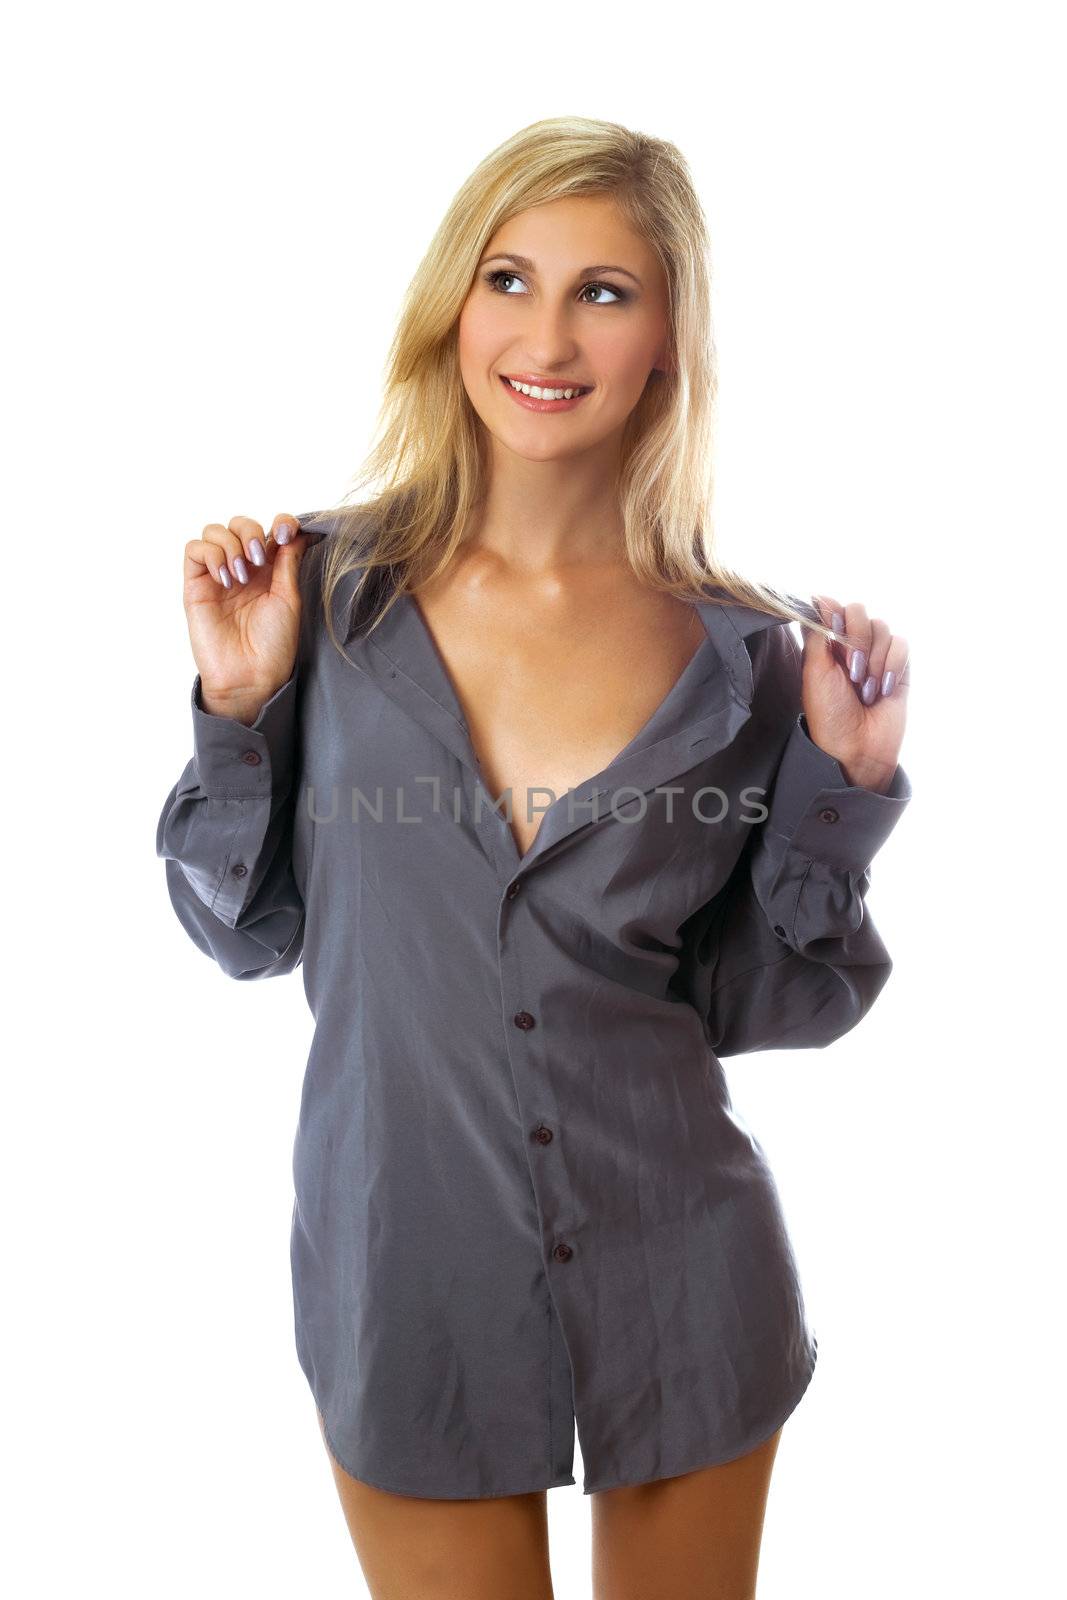 Portrait of smiling young woman in man's shirts